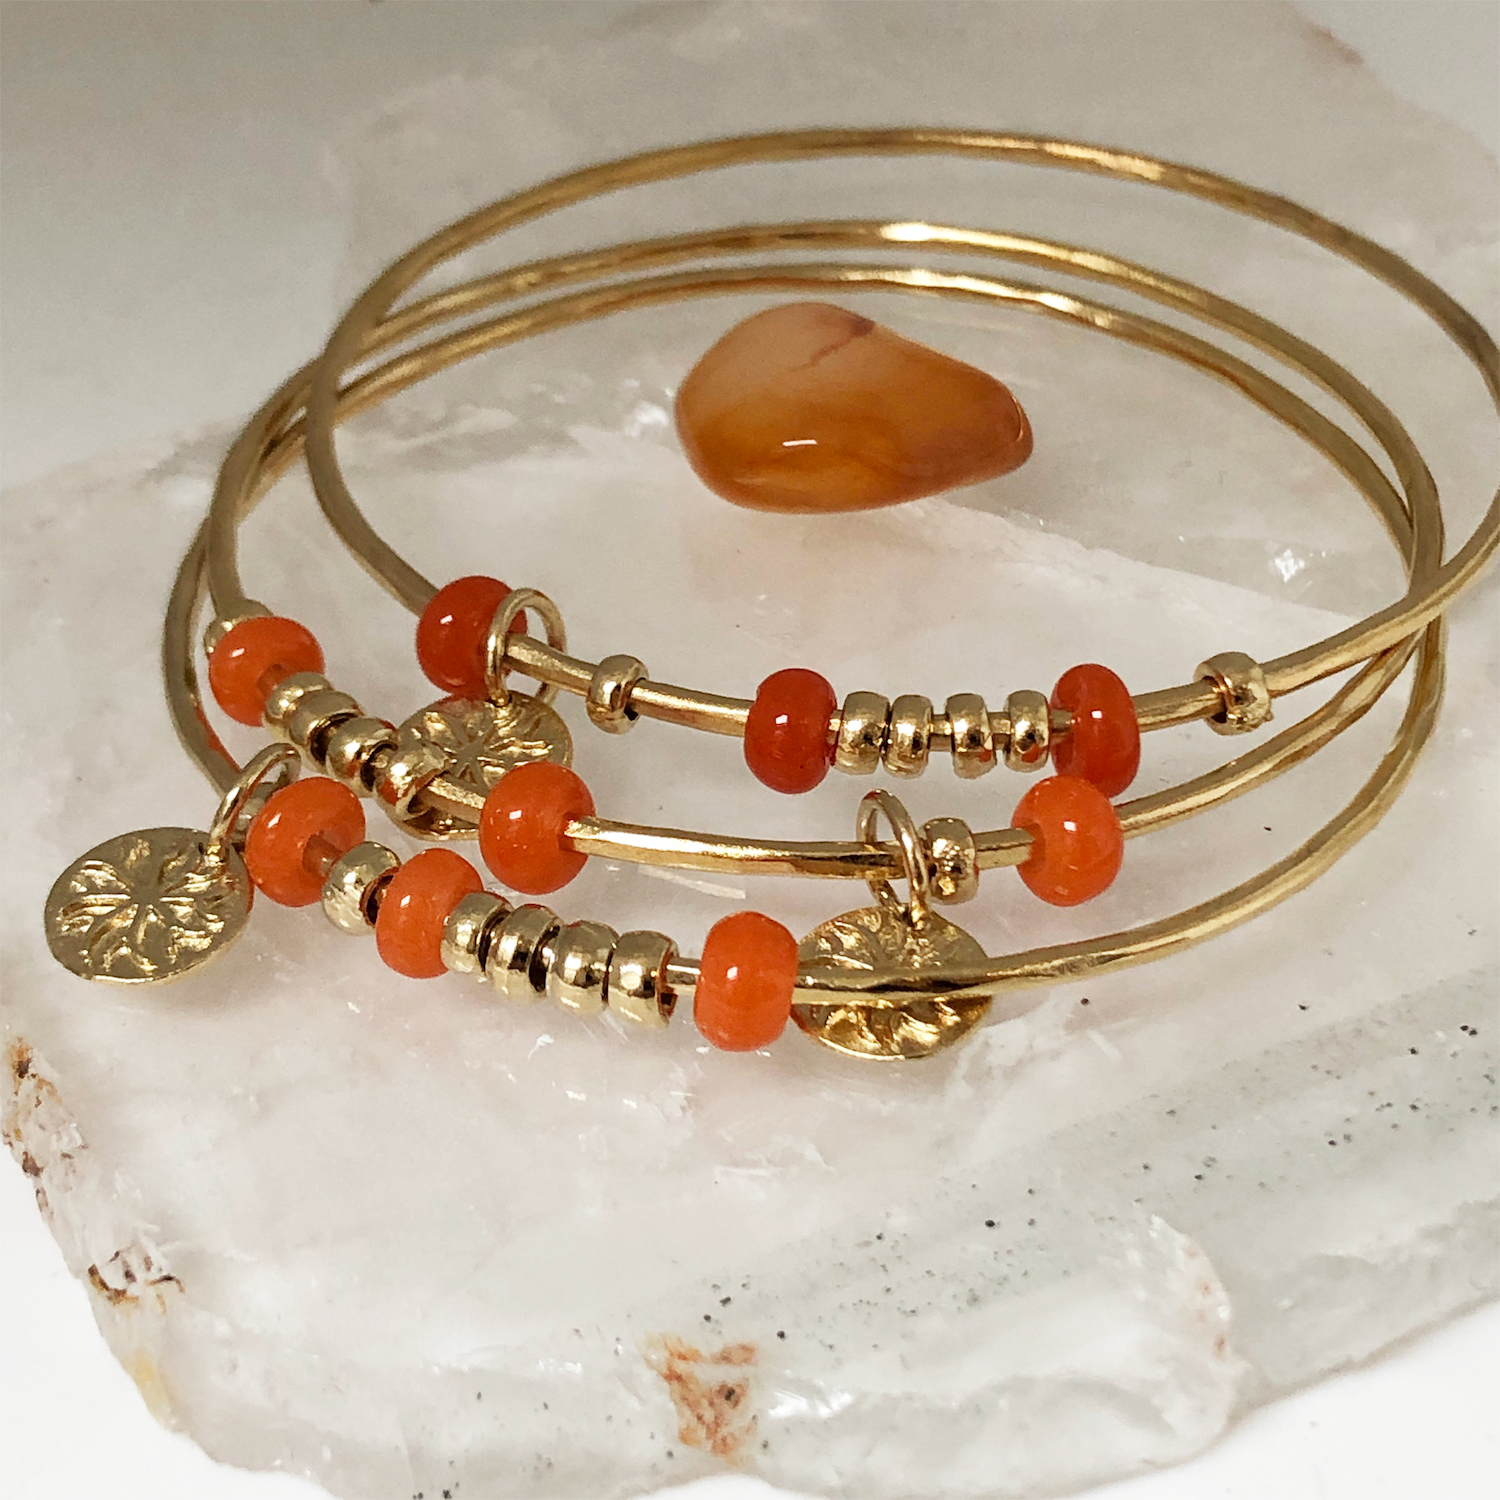 Fair Trade Bangle with Orange Recycled Glass - Mirabelle Jewellery